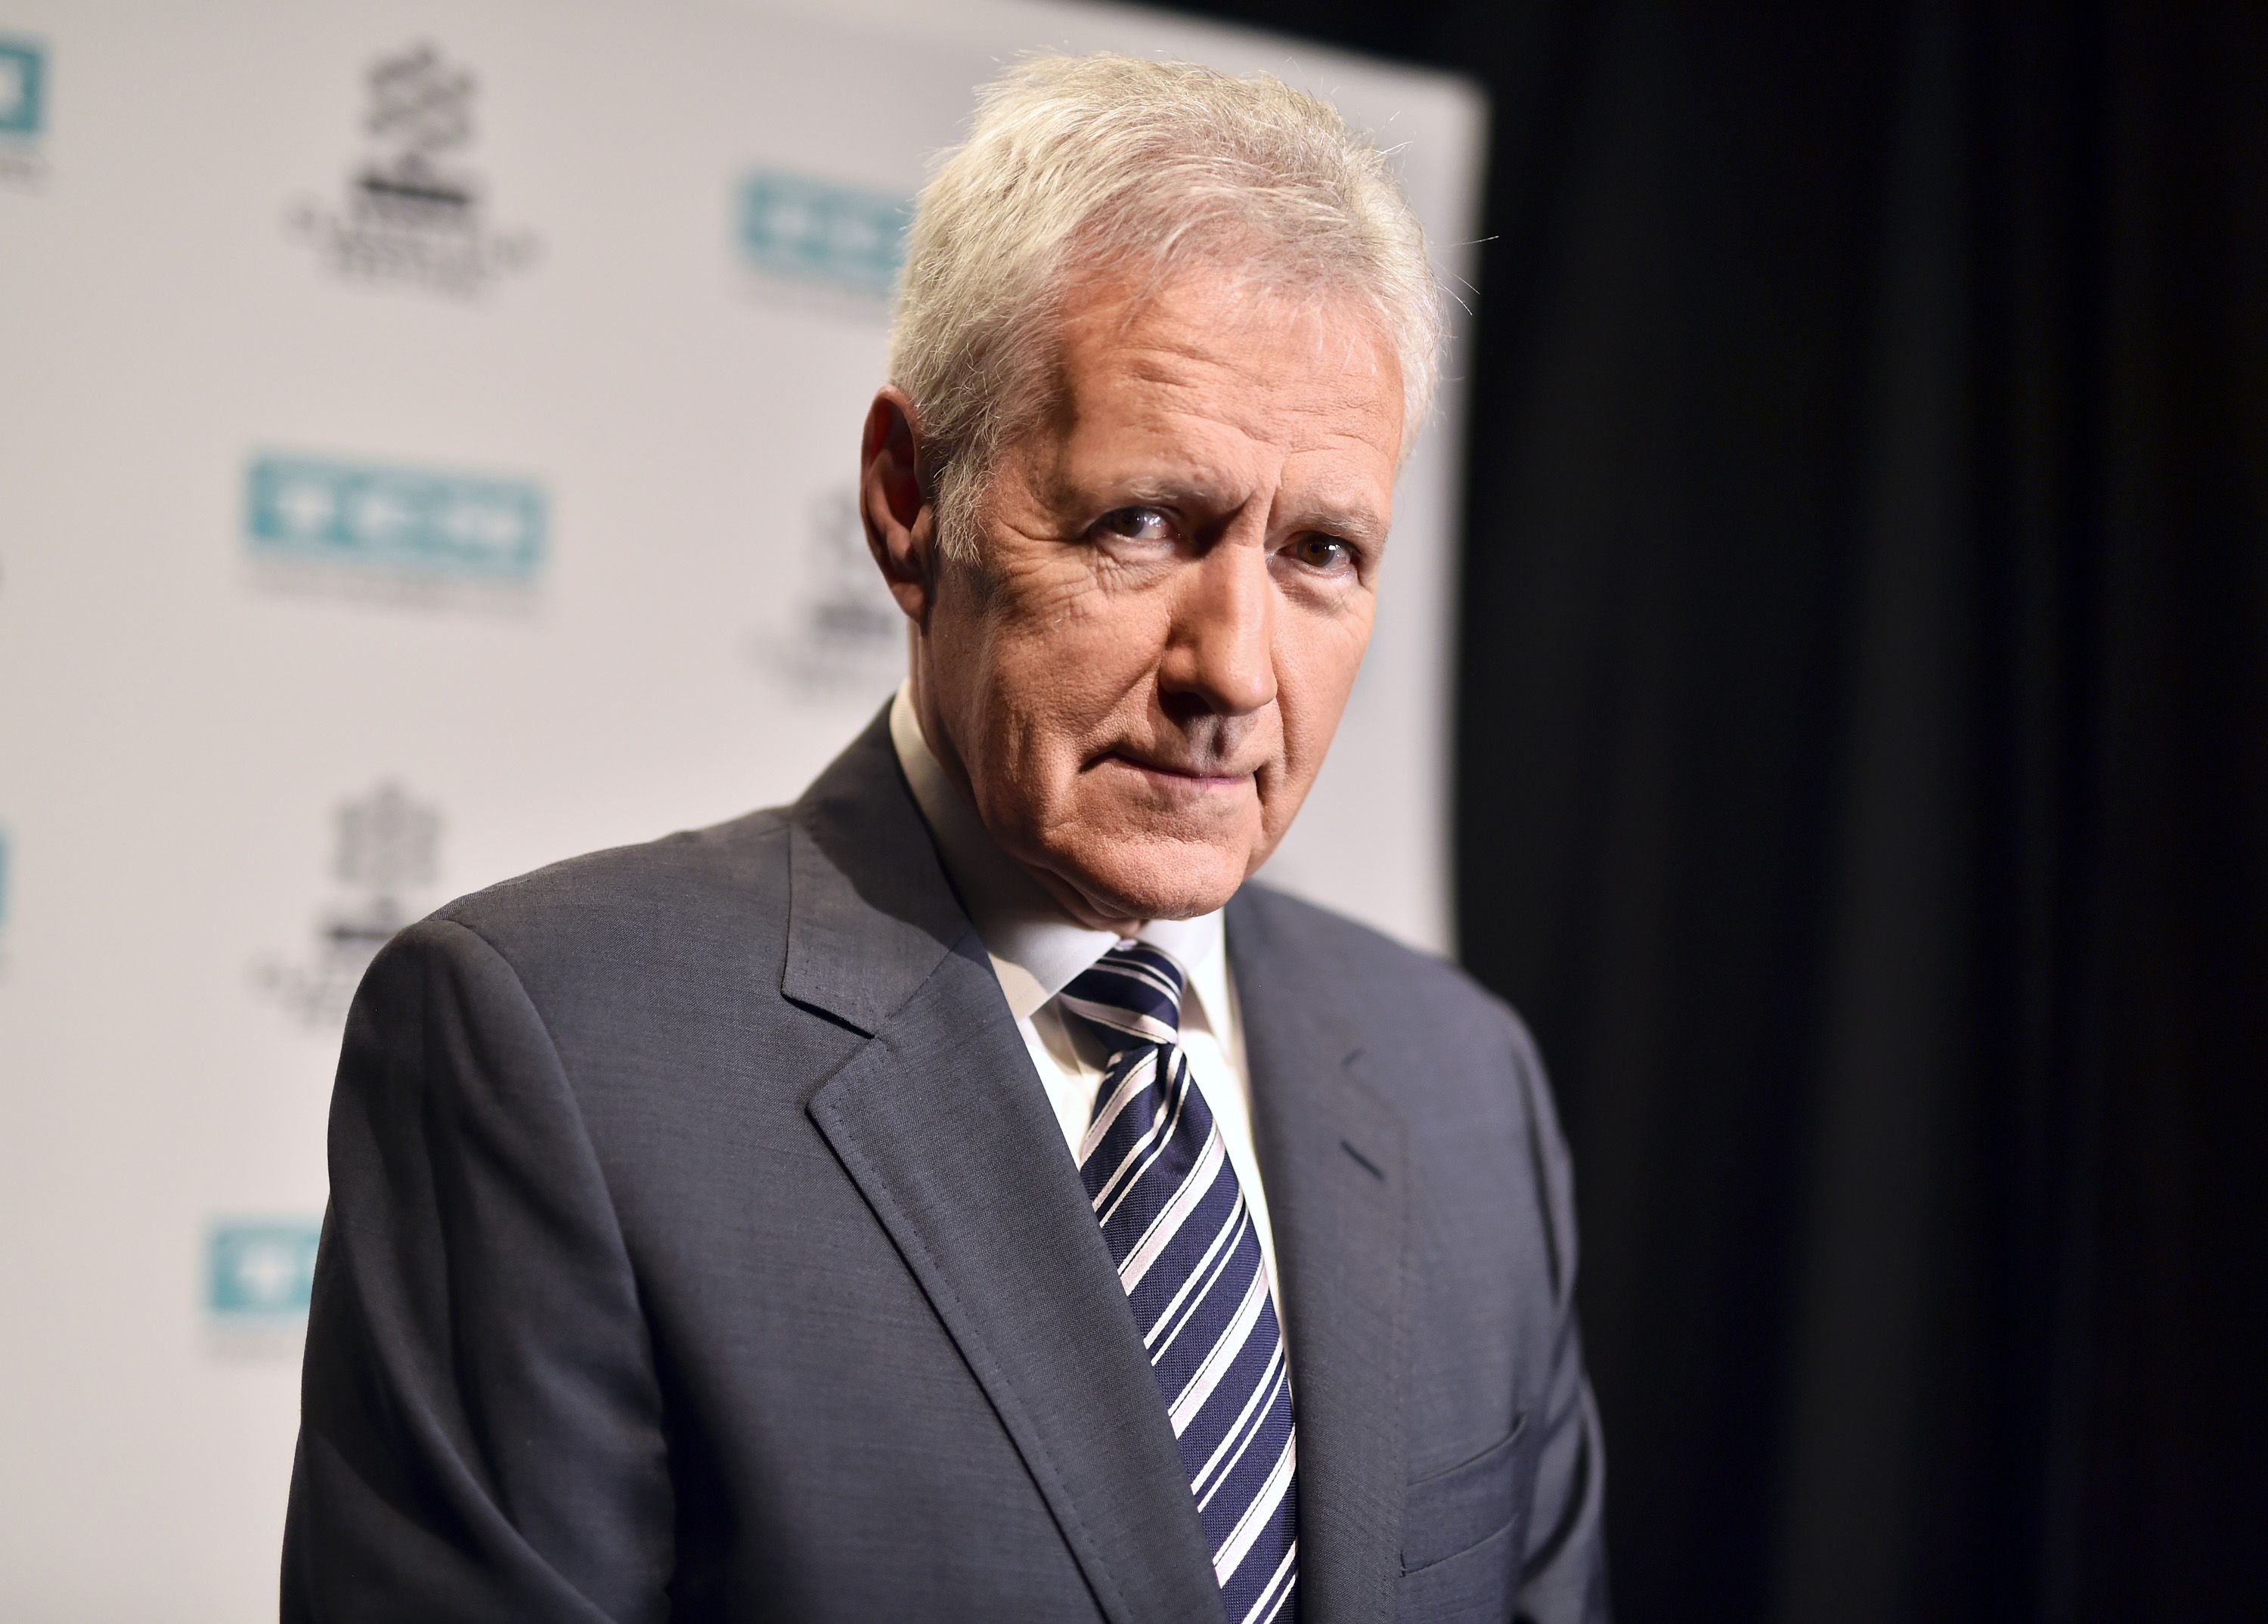 Alex Trebek at the screening of 'The Bridge on The River Kwai' on April 7, 2017 | Photo: Getty Images